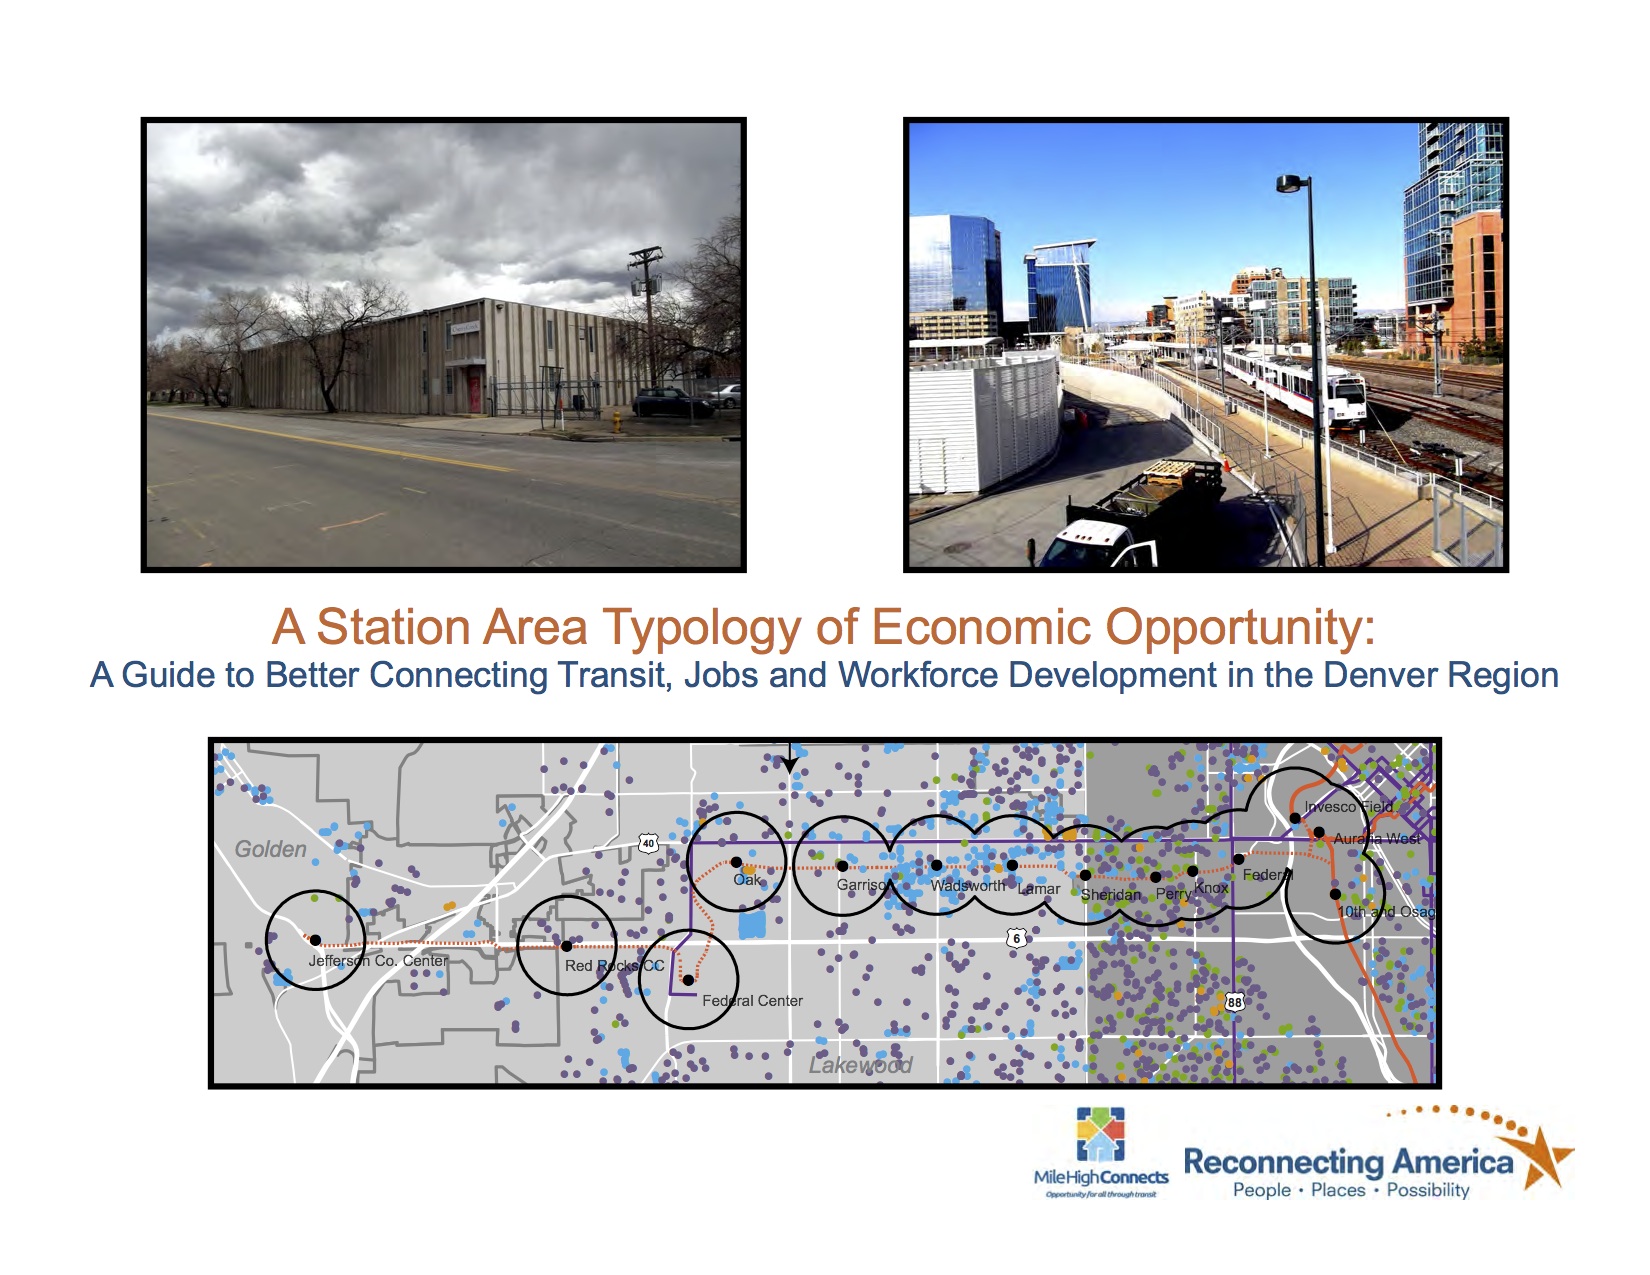 A Station Area Typology of Economic Opportunity: A Guide to Better Connecting Transit, Jobs and Workforce Development in the Denver Region